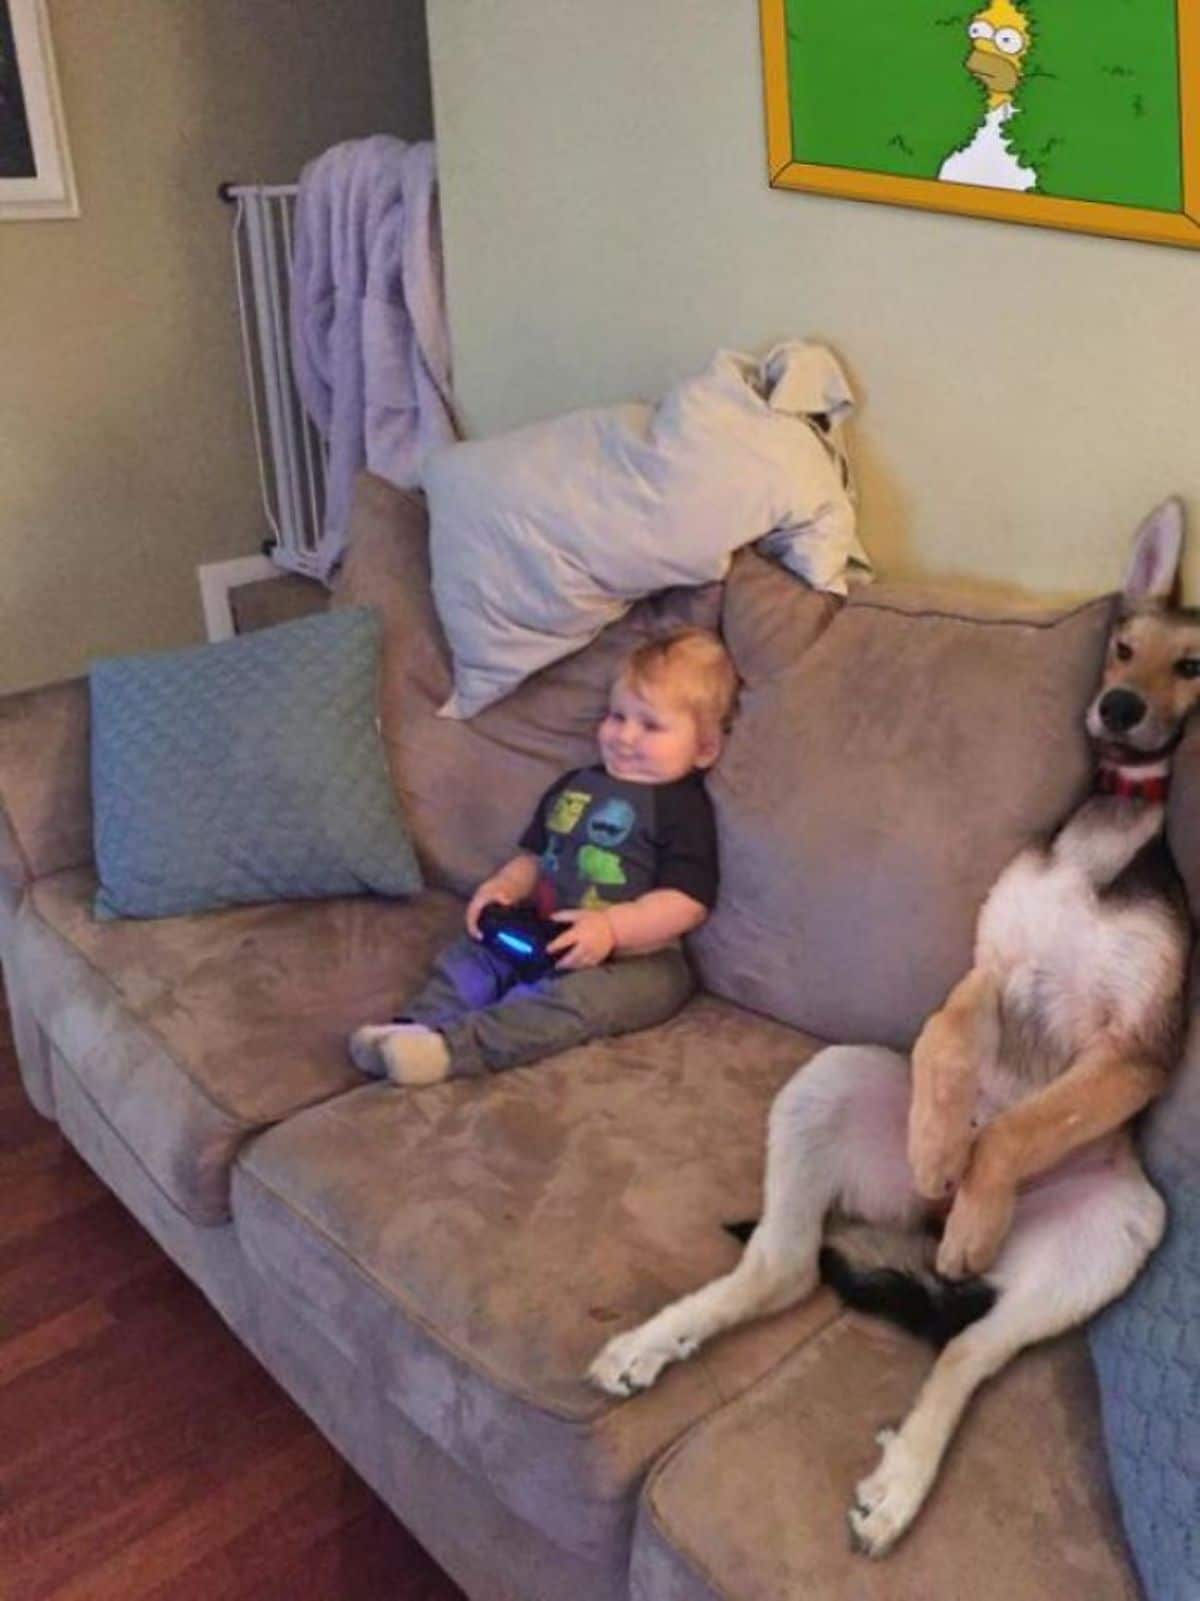 black brown and white dog sitting upright with the body between 2 cushions and a toddler next to the dog mimicking the dog